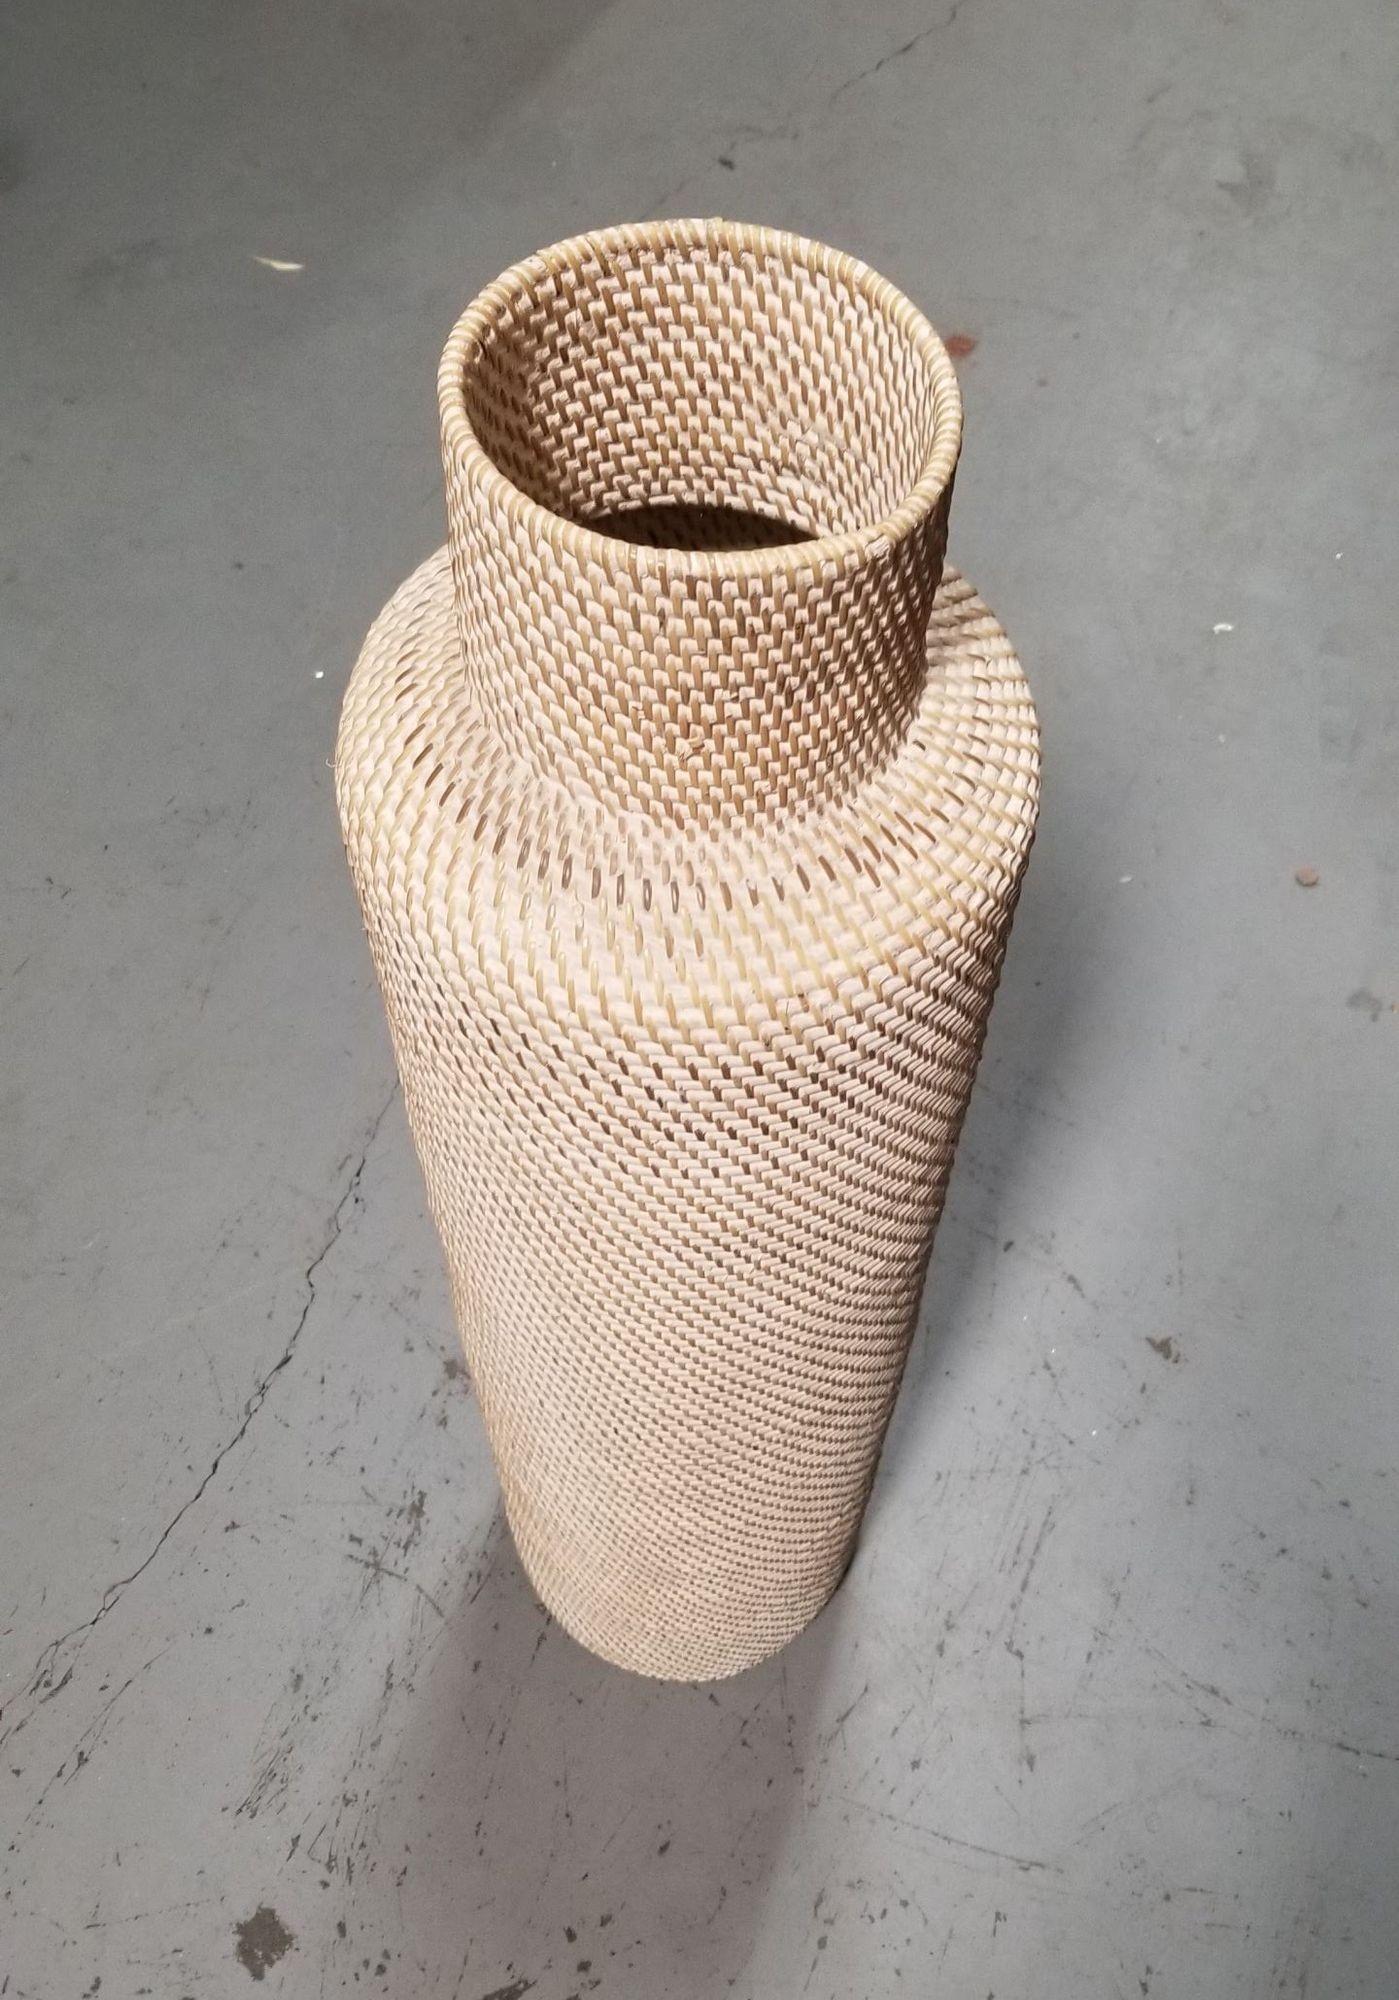 Single Gabriella Crespi-styled decorative floor vases made from stacked white-beige reed pencil rattan rings with wicker weave. Perfect for holding dried plant arrangements or simply standing on its own.

Circa 1970, United States

We only purchase